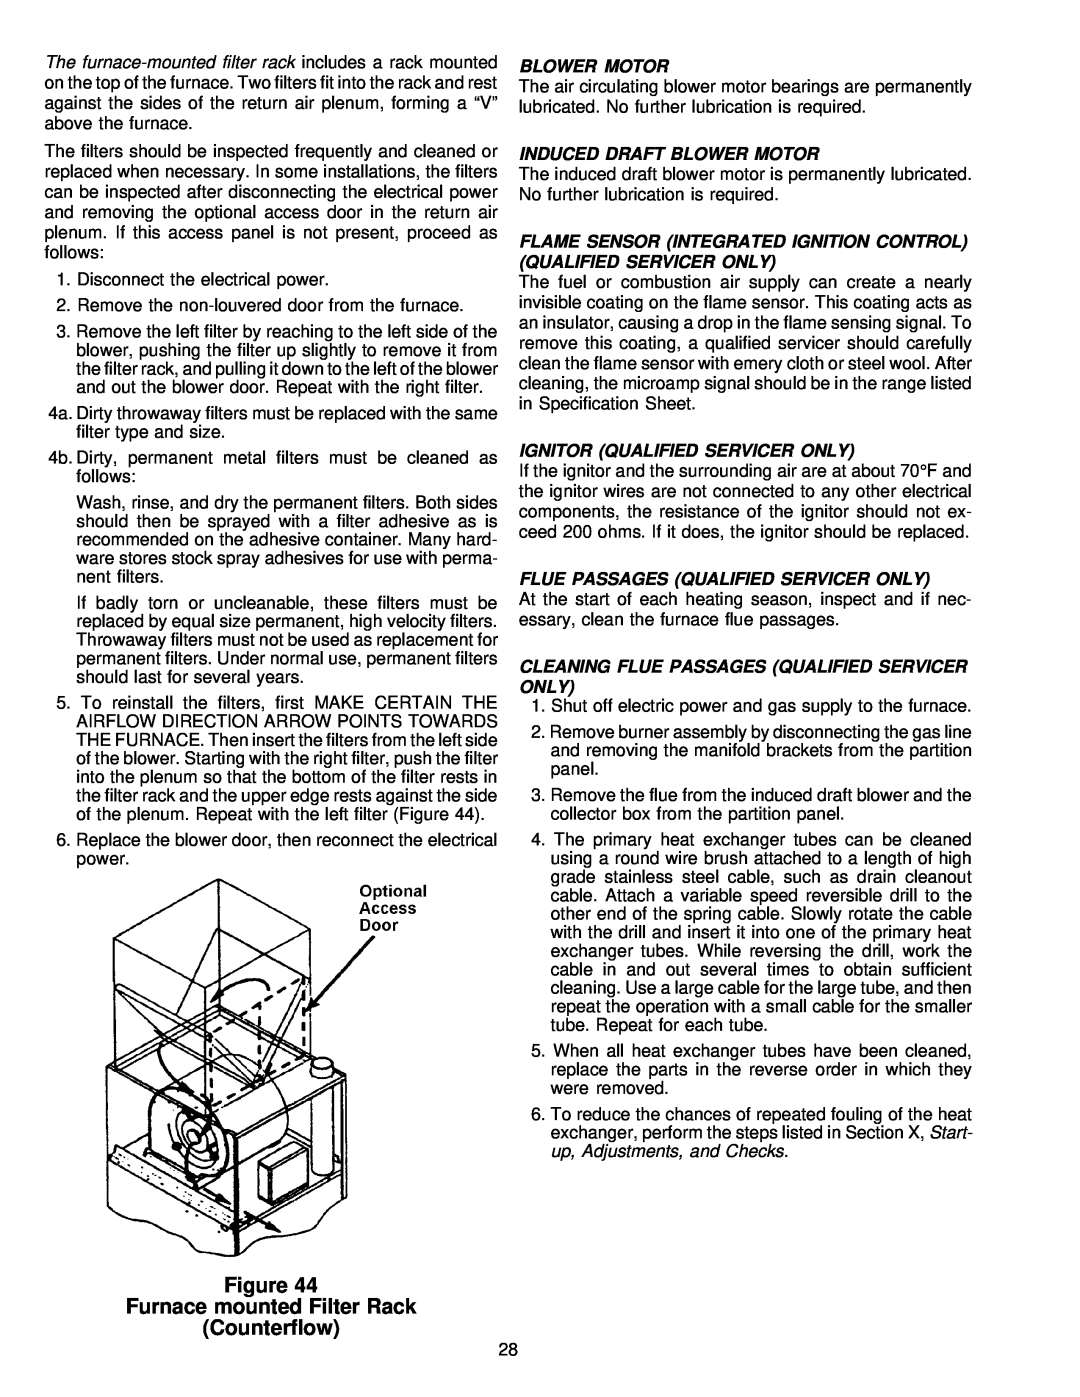 Amana VR8205 installation instructions Figure Furnace mounted Filter Rack Counterflow, Induced Draft Blower Motor 